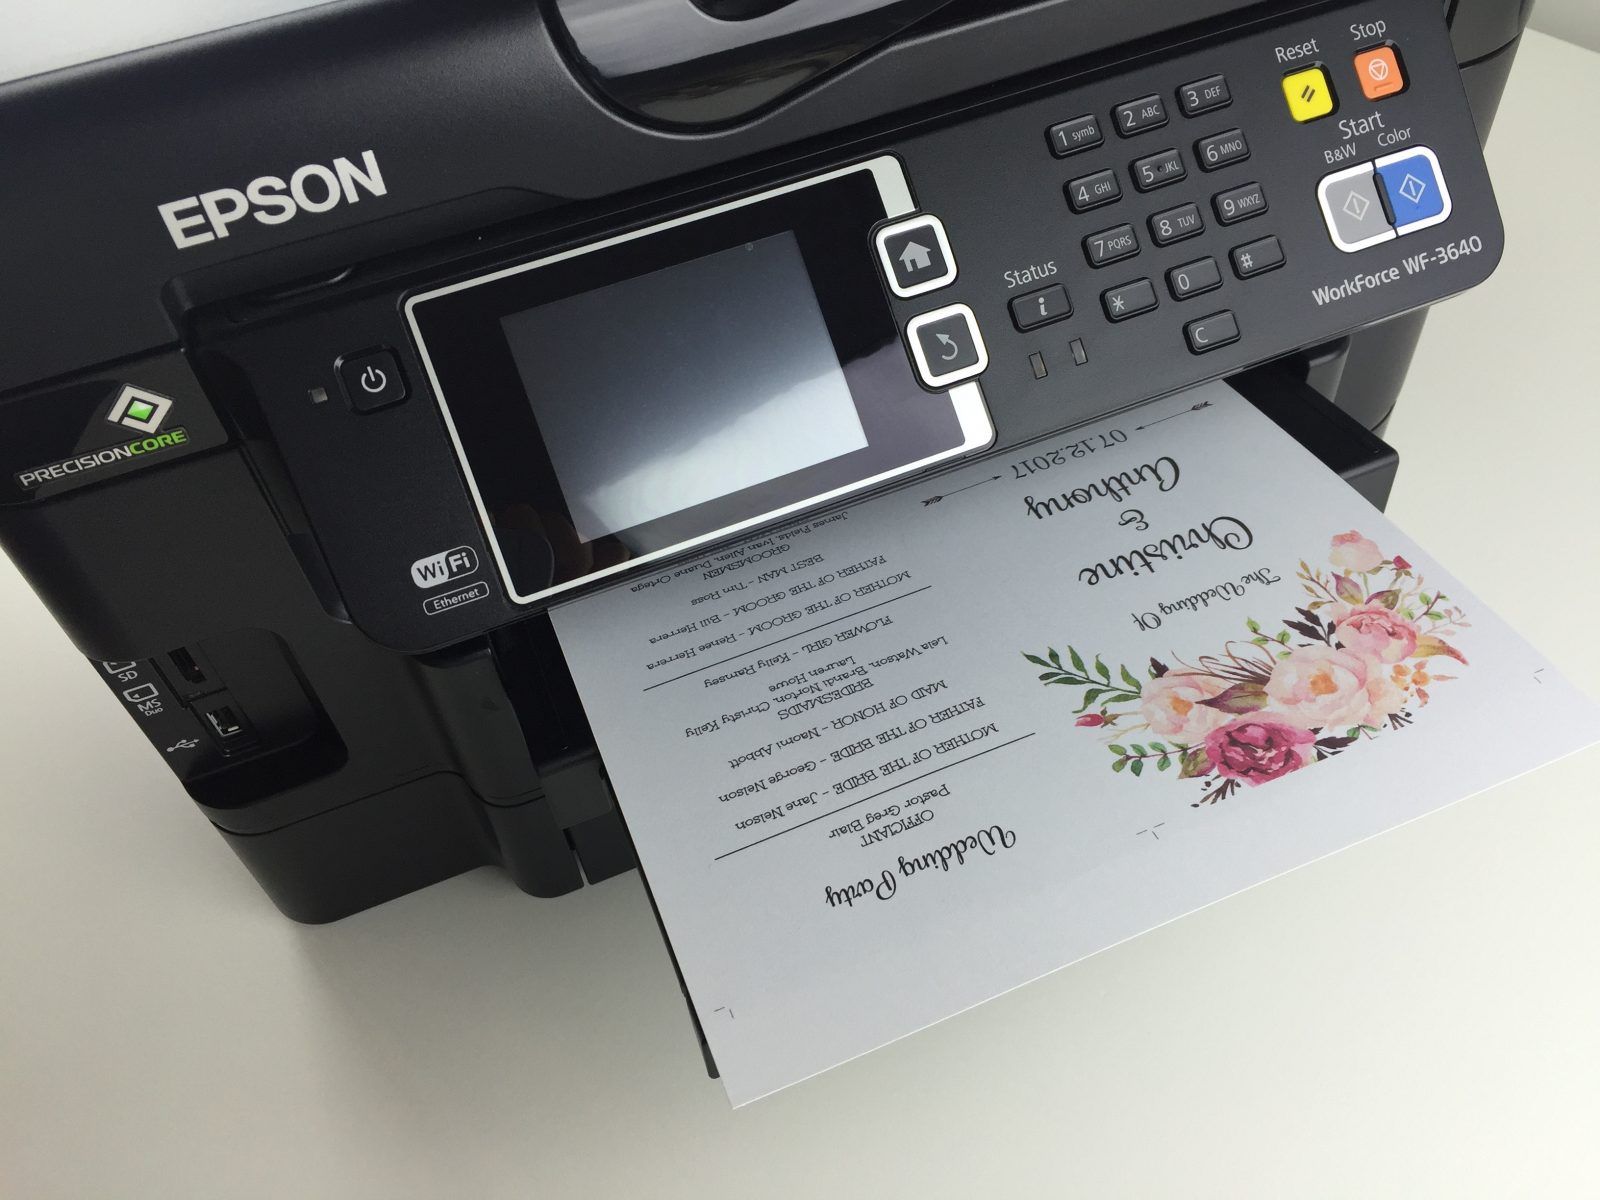 How To Scan To Email From Epson Printer